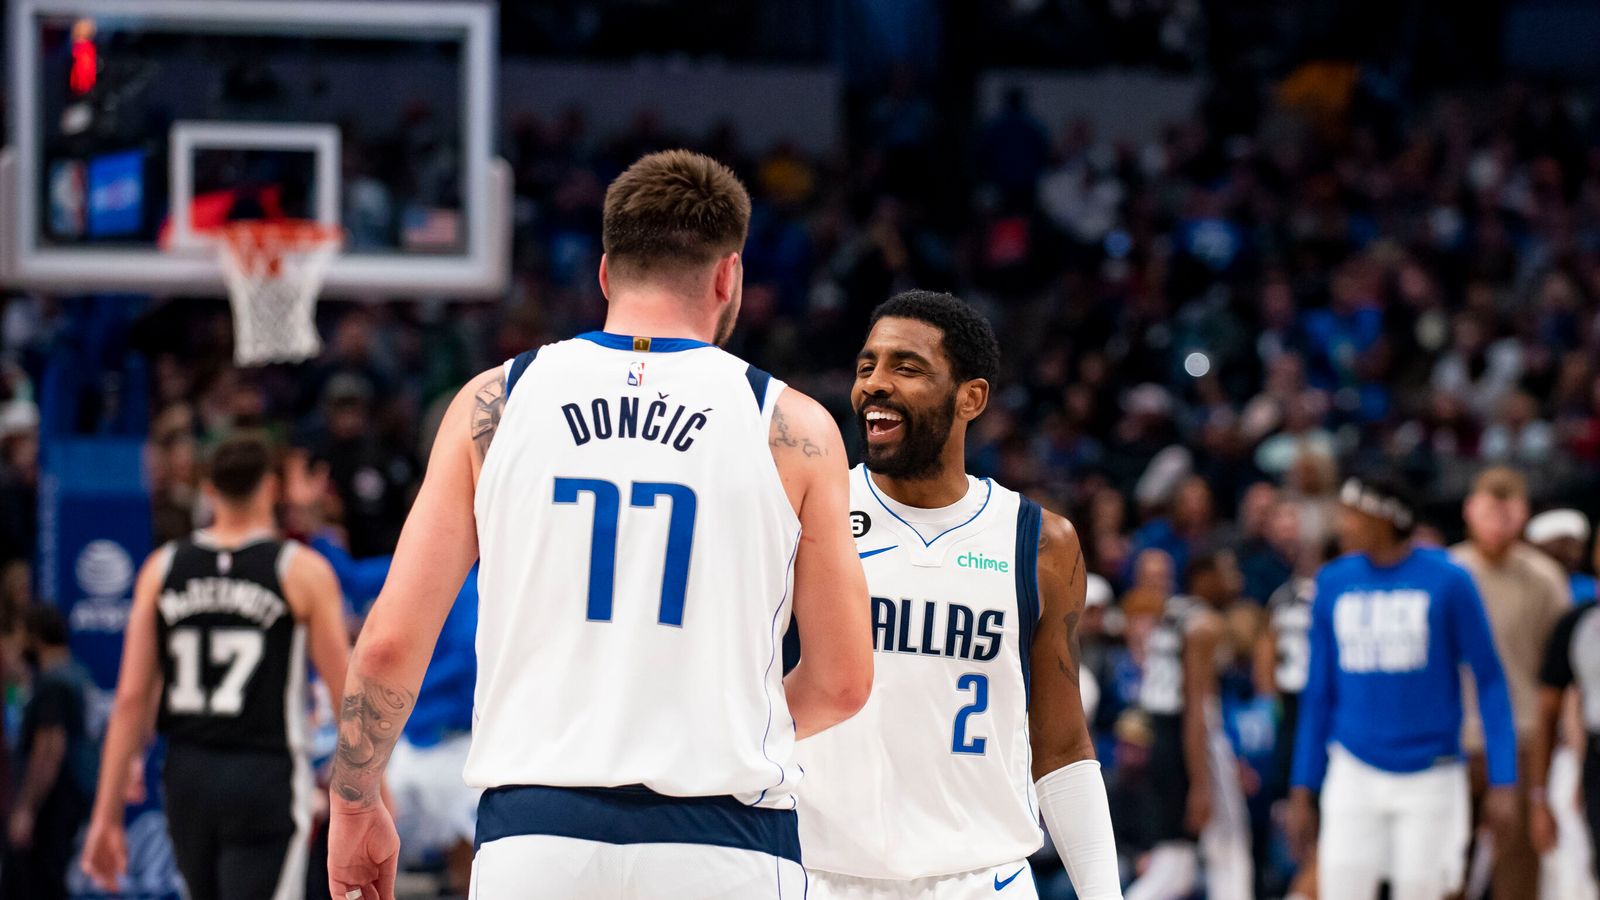 Nba Round Up Luka Doncic And Kyrie Irving Get First Tandem Win As The Dallas Mavericks Rout The